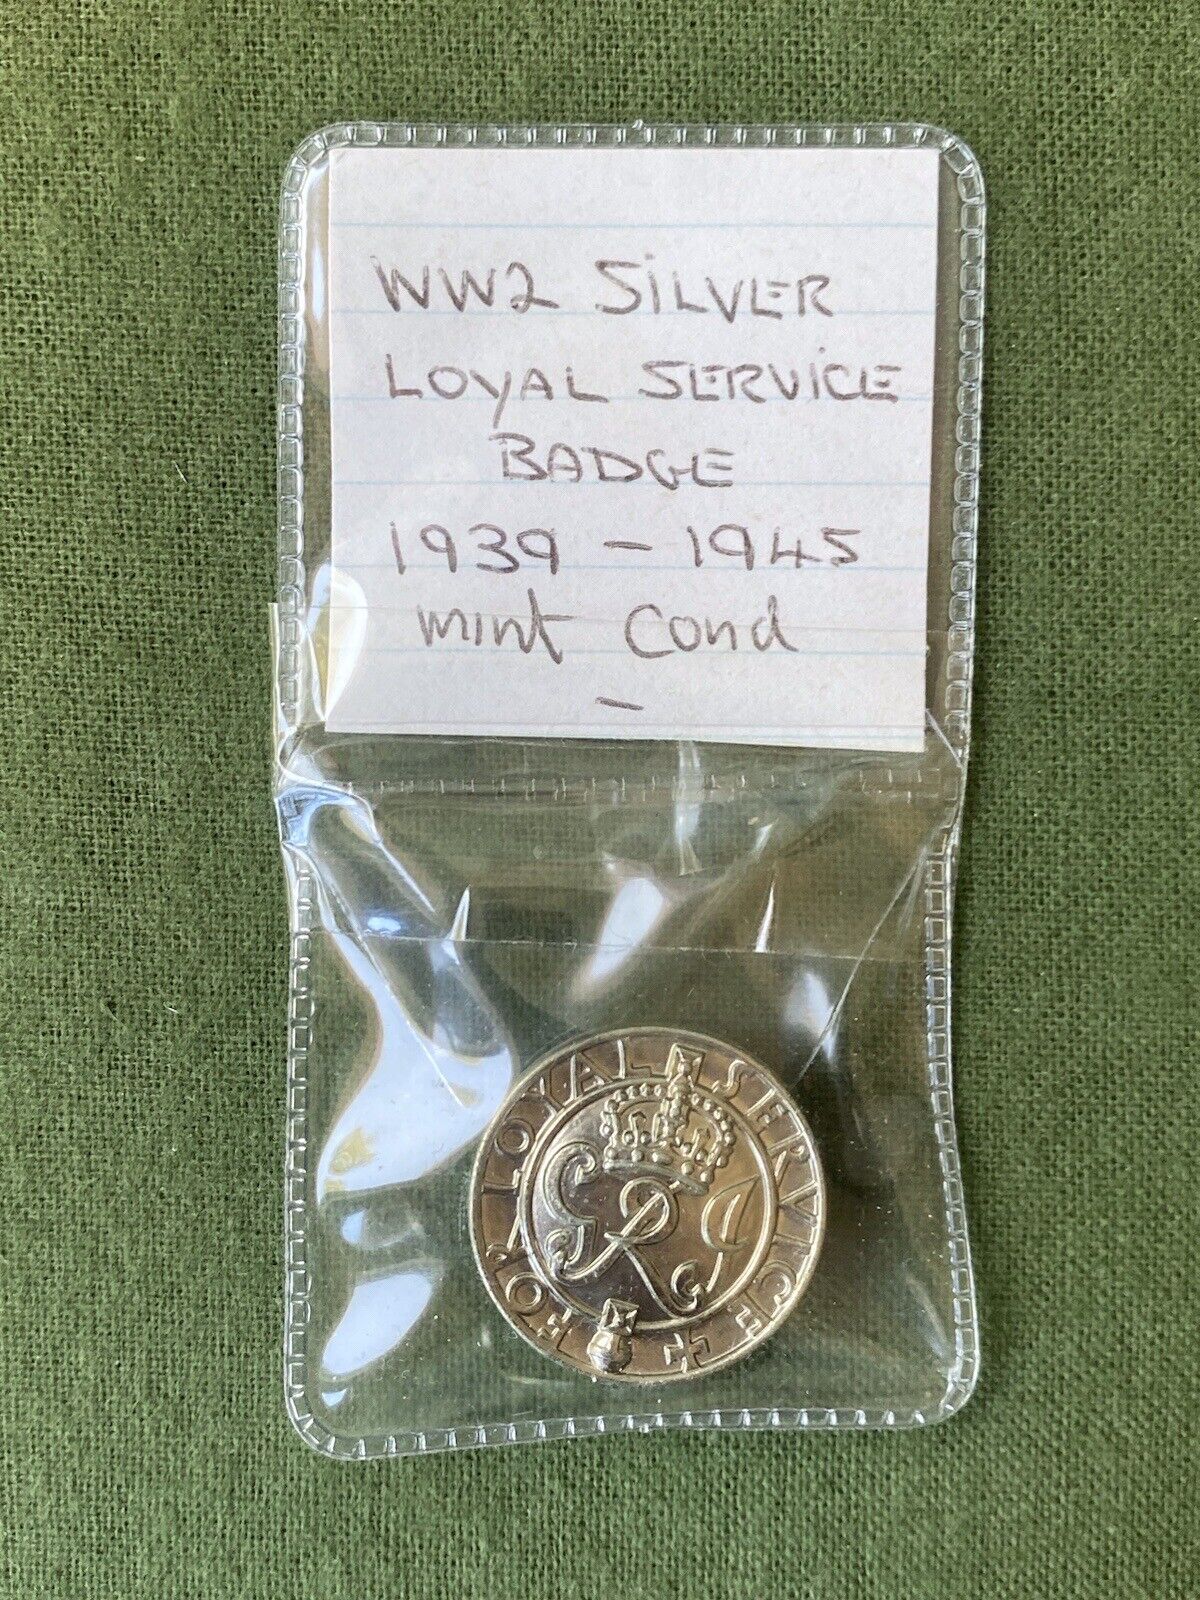 WW II  SILVER  LOYAL SERVICE BADGE; 1939-1945 MINT CONDITION (THE KING’S BADGE?)